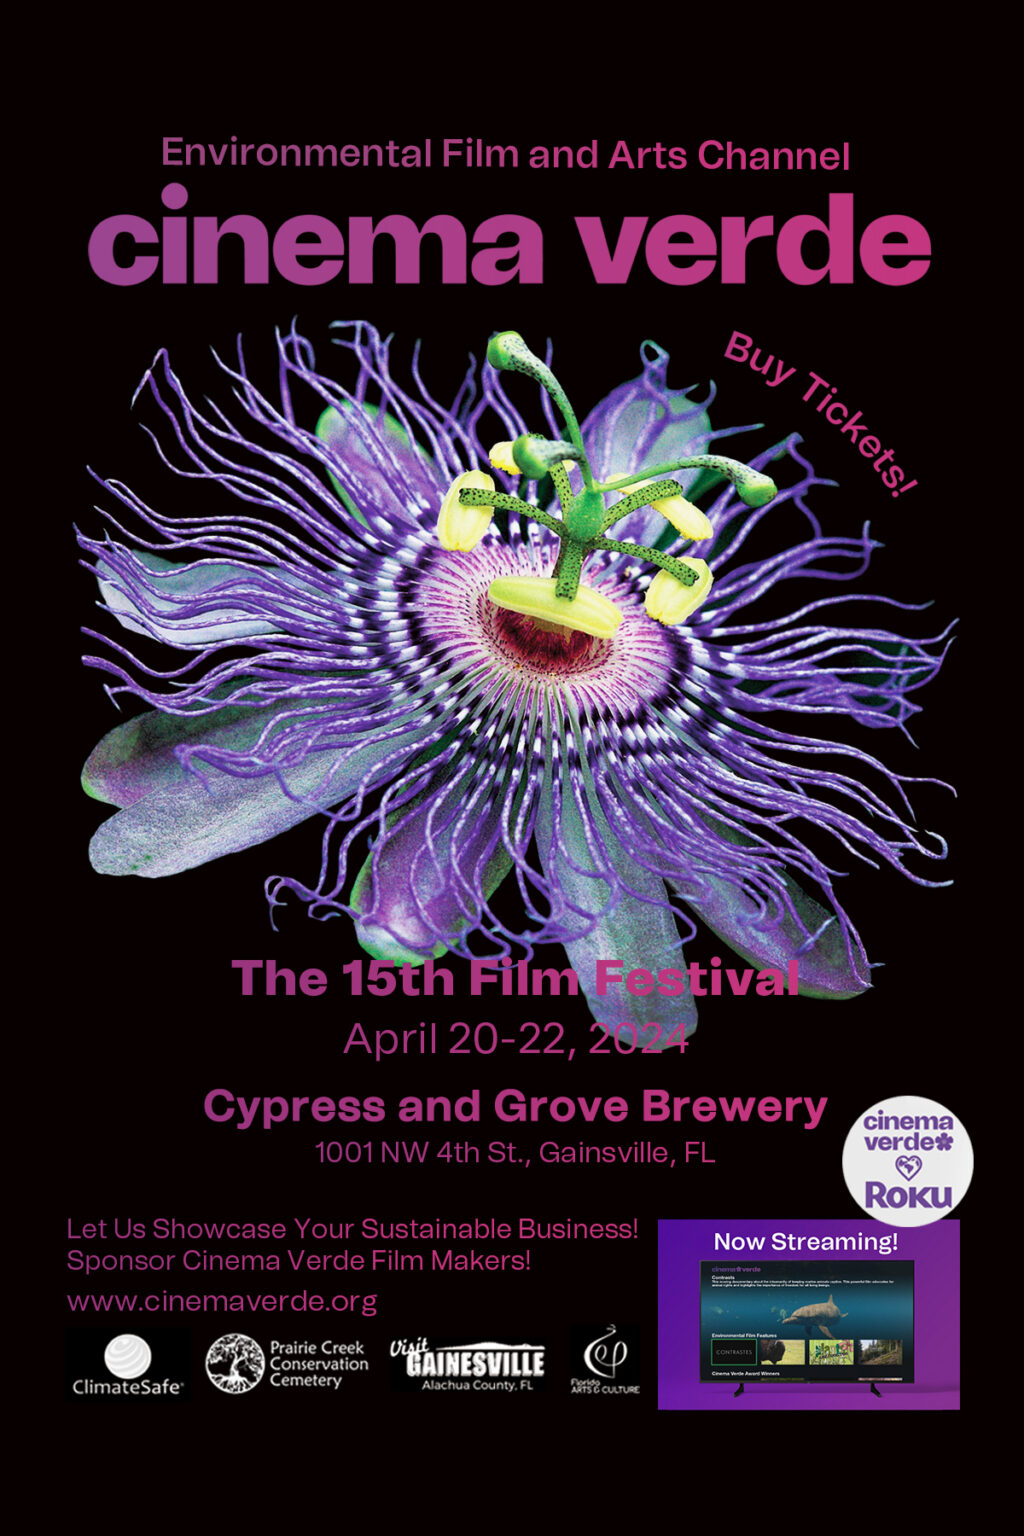 Cinema Verde will be held April 20-22 at Cypress and Grove Brewery